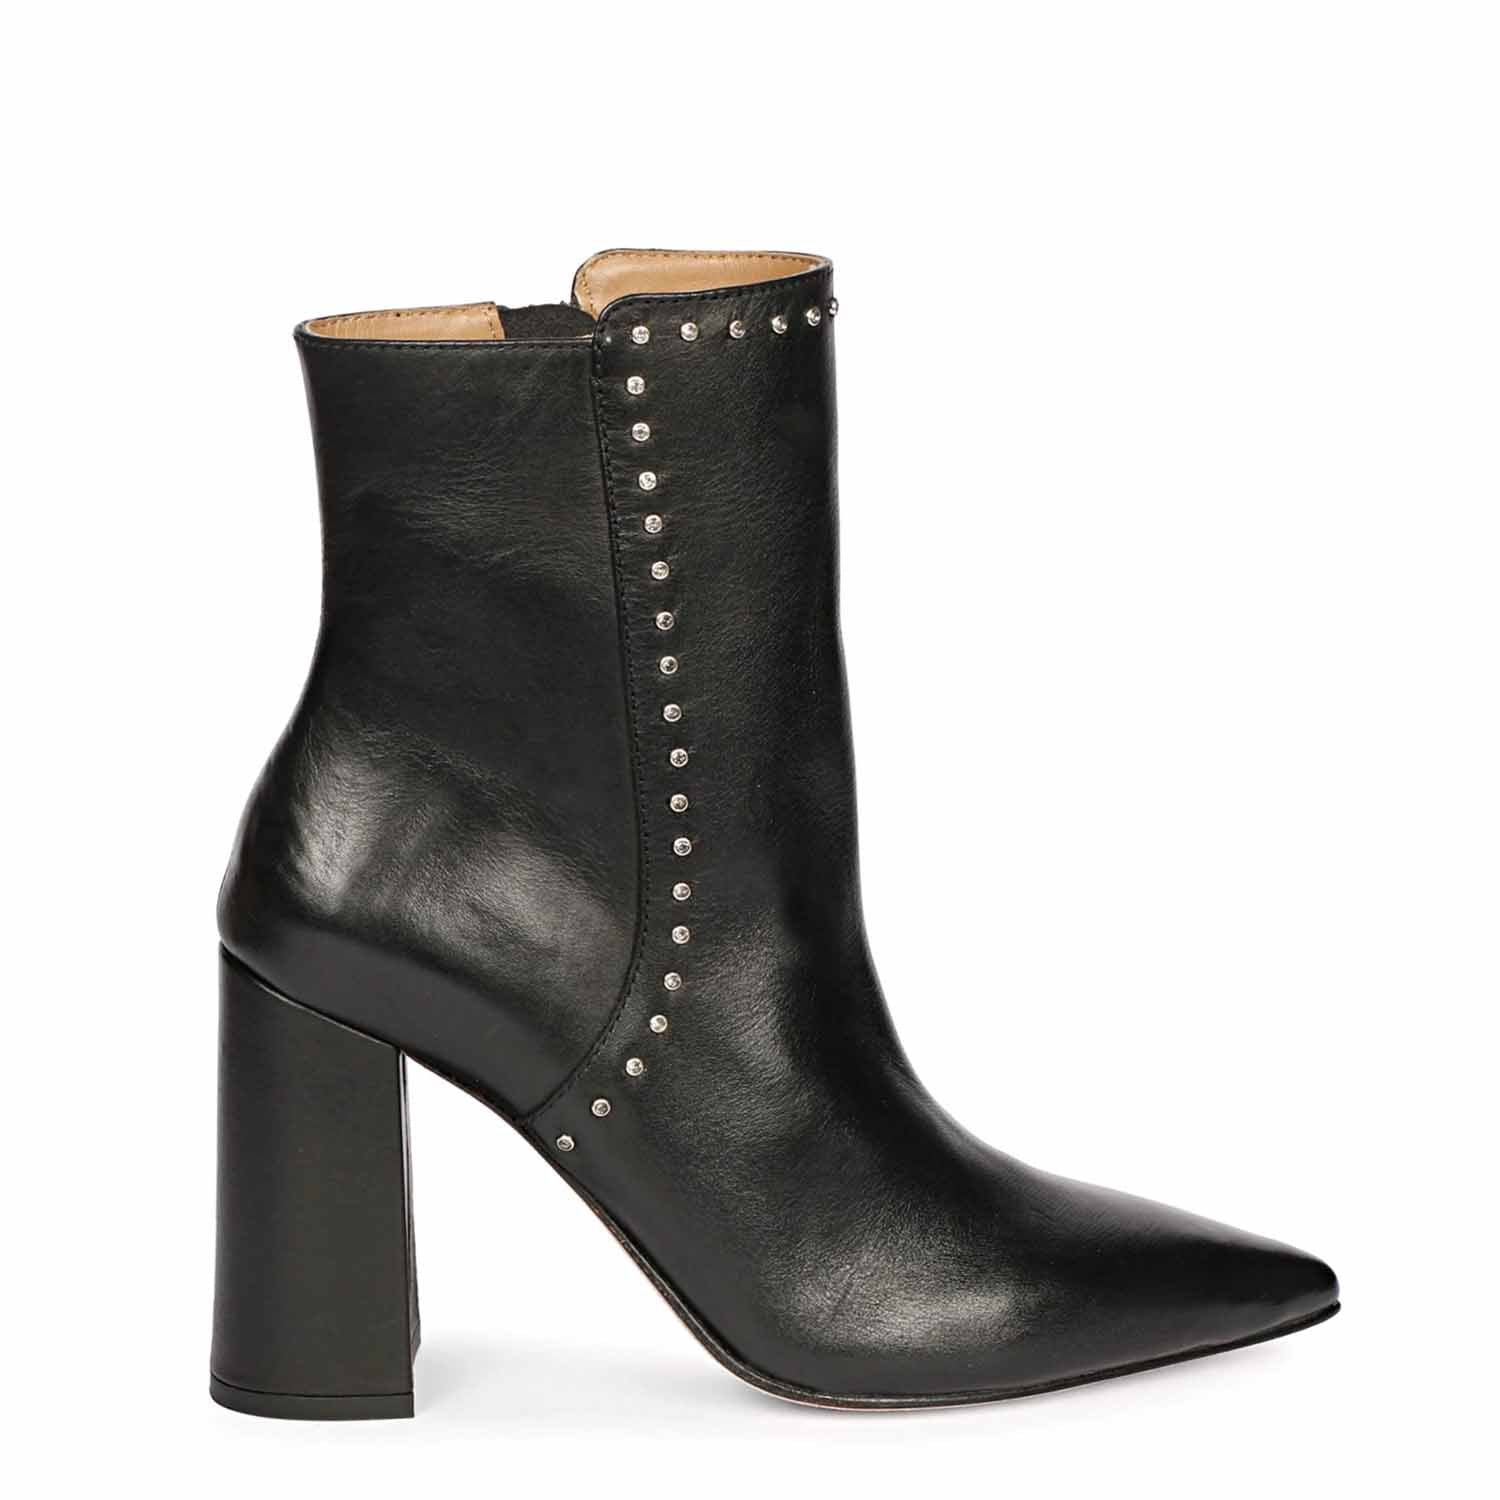 Mesh heel ankle boots - Women | MANGO OUTLET USA